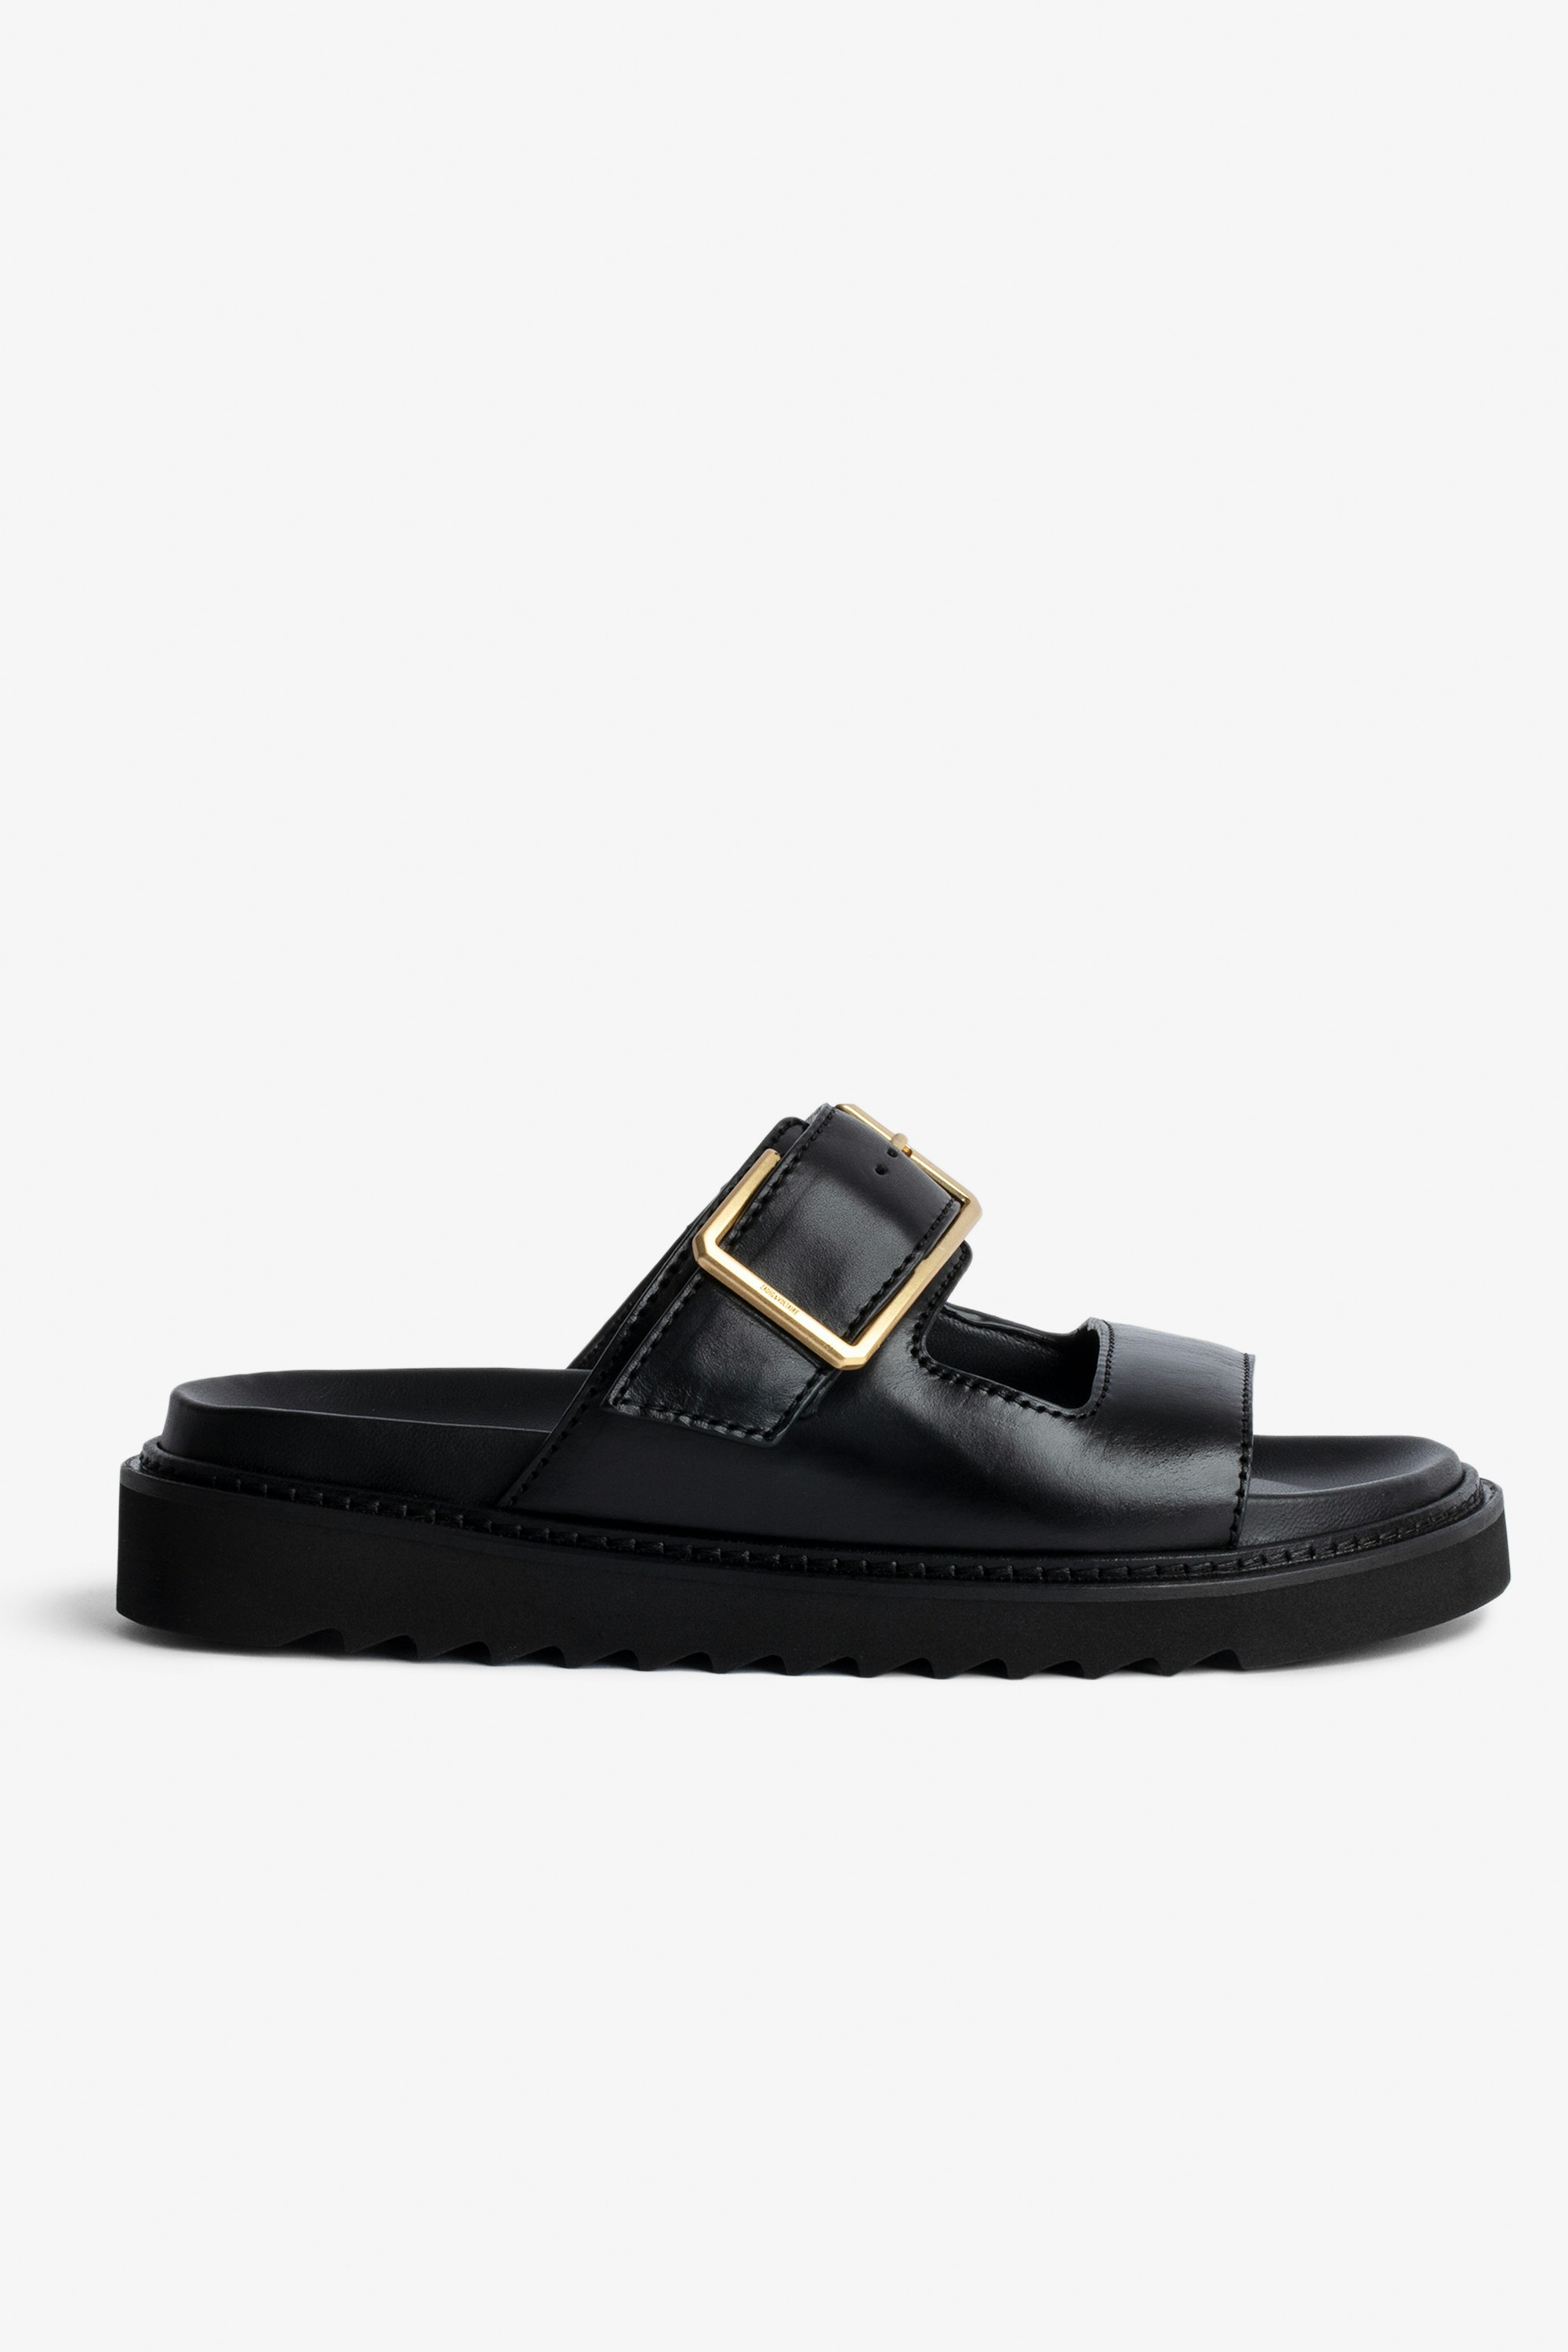 Cecilia Alpha Sandals undefined